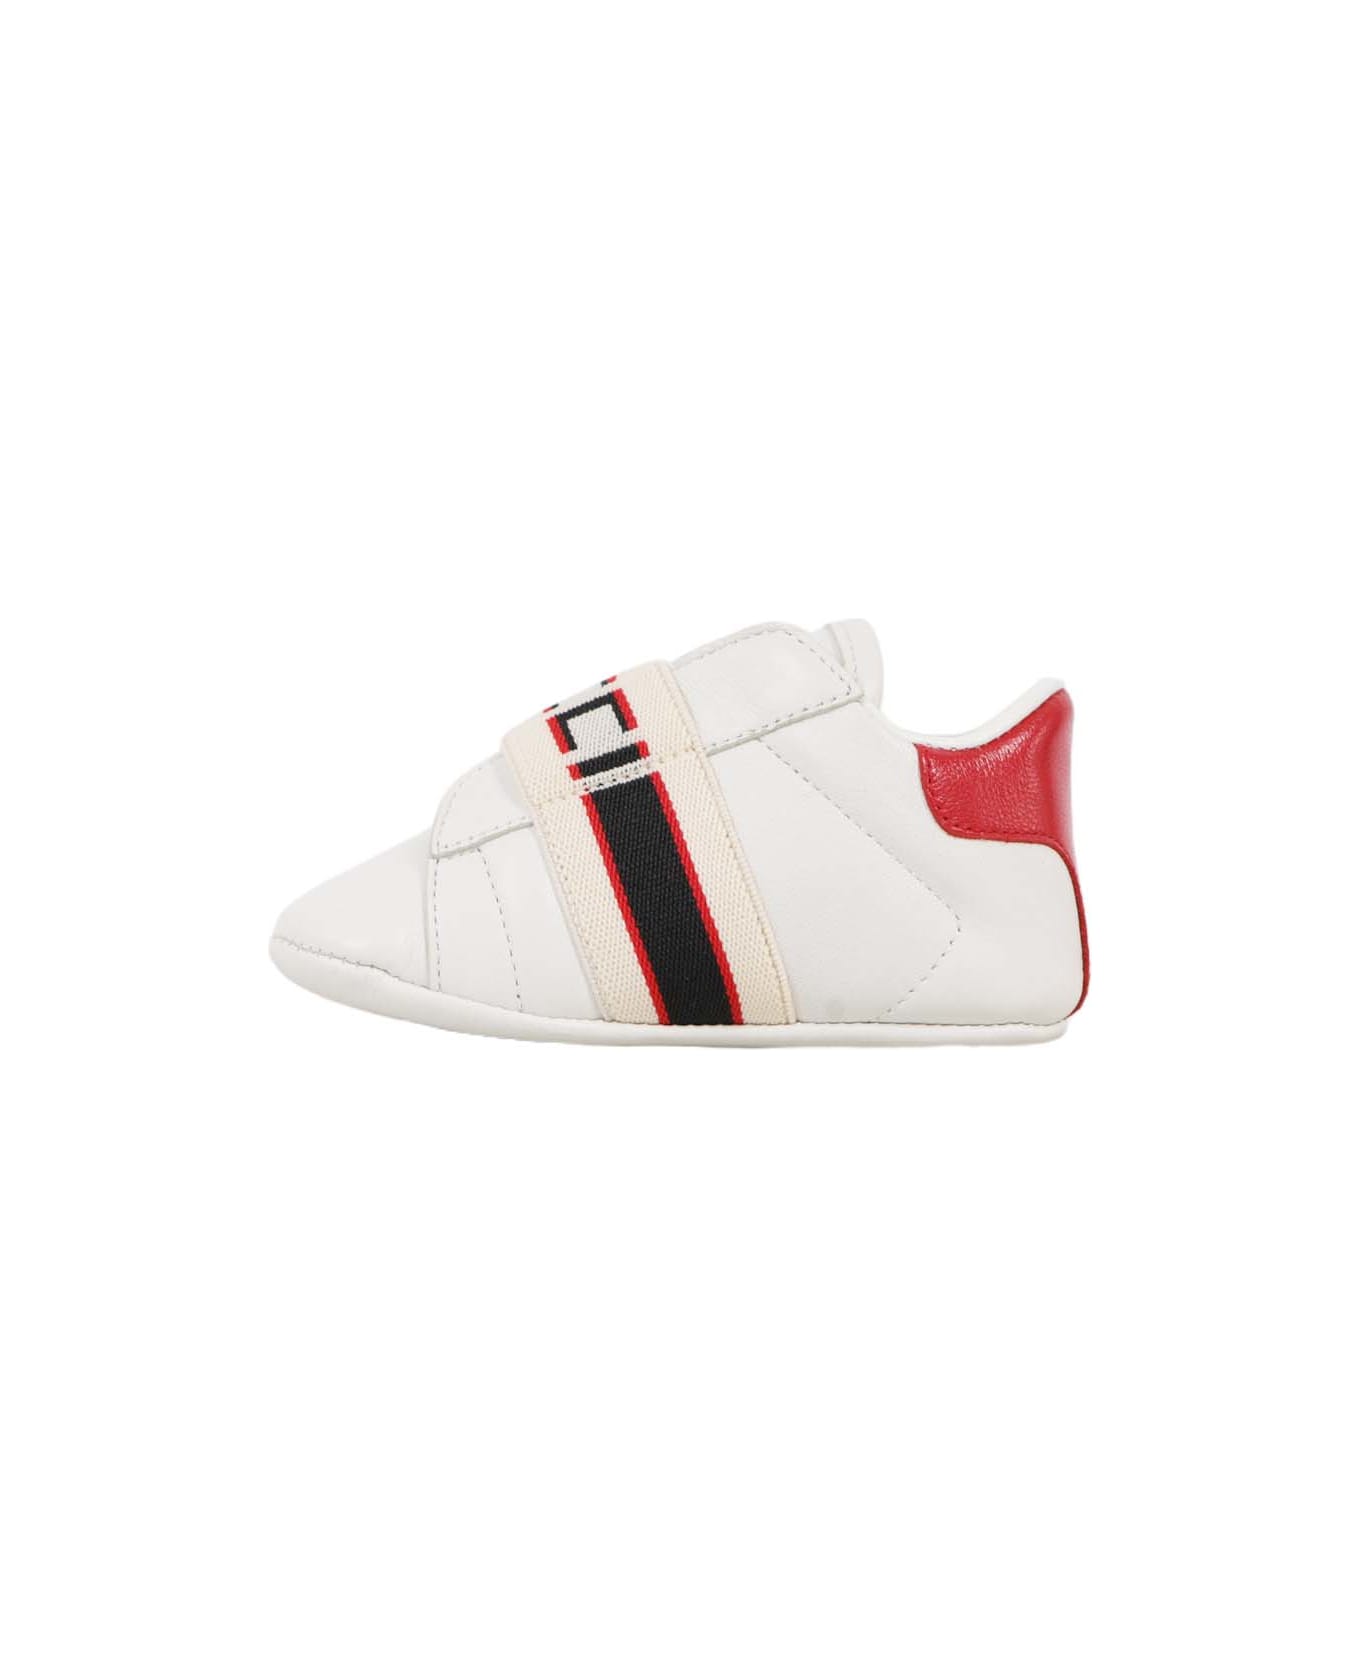 Gucci Leather Sneakers - White